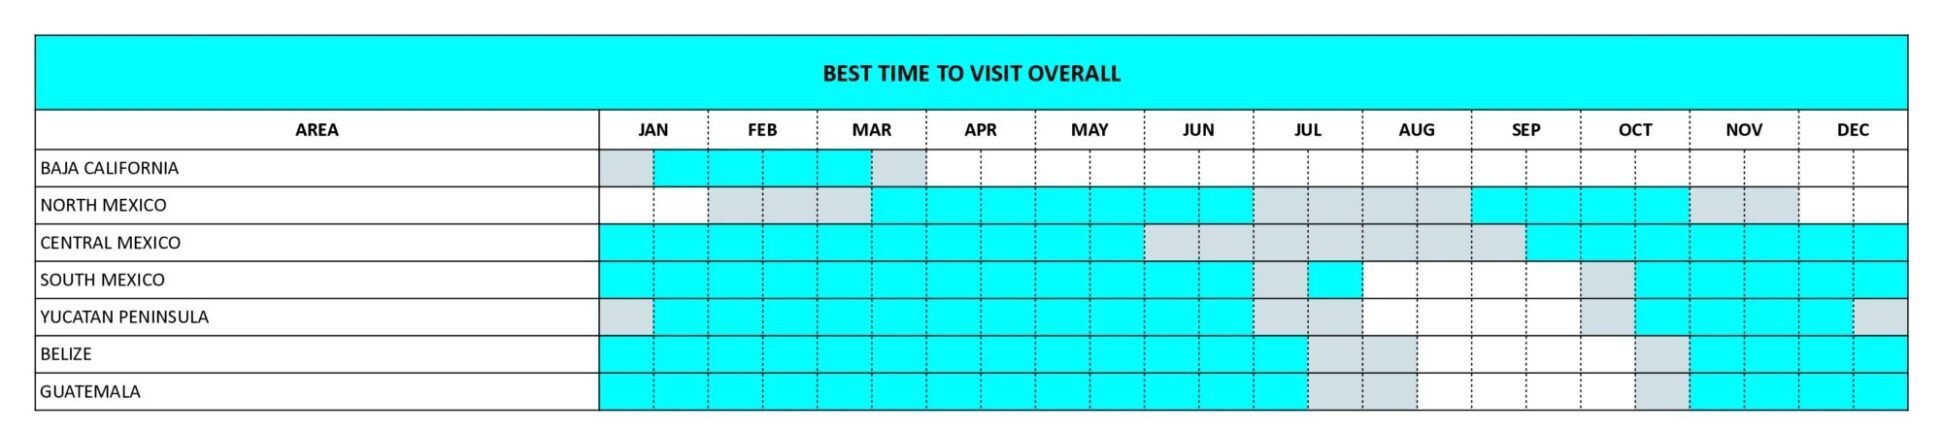 Best time to visit